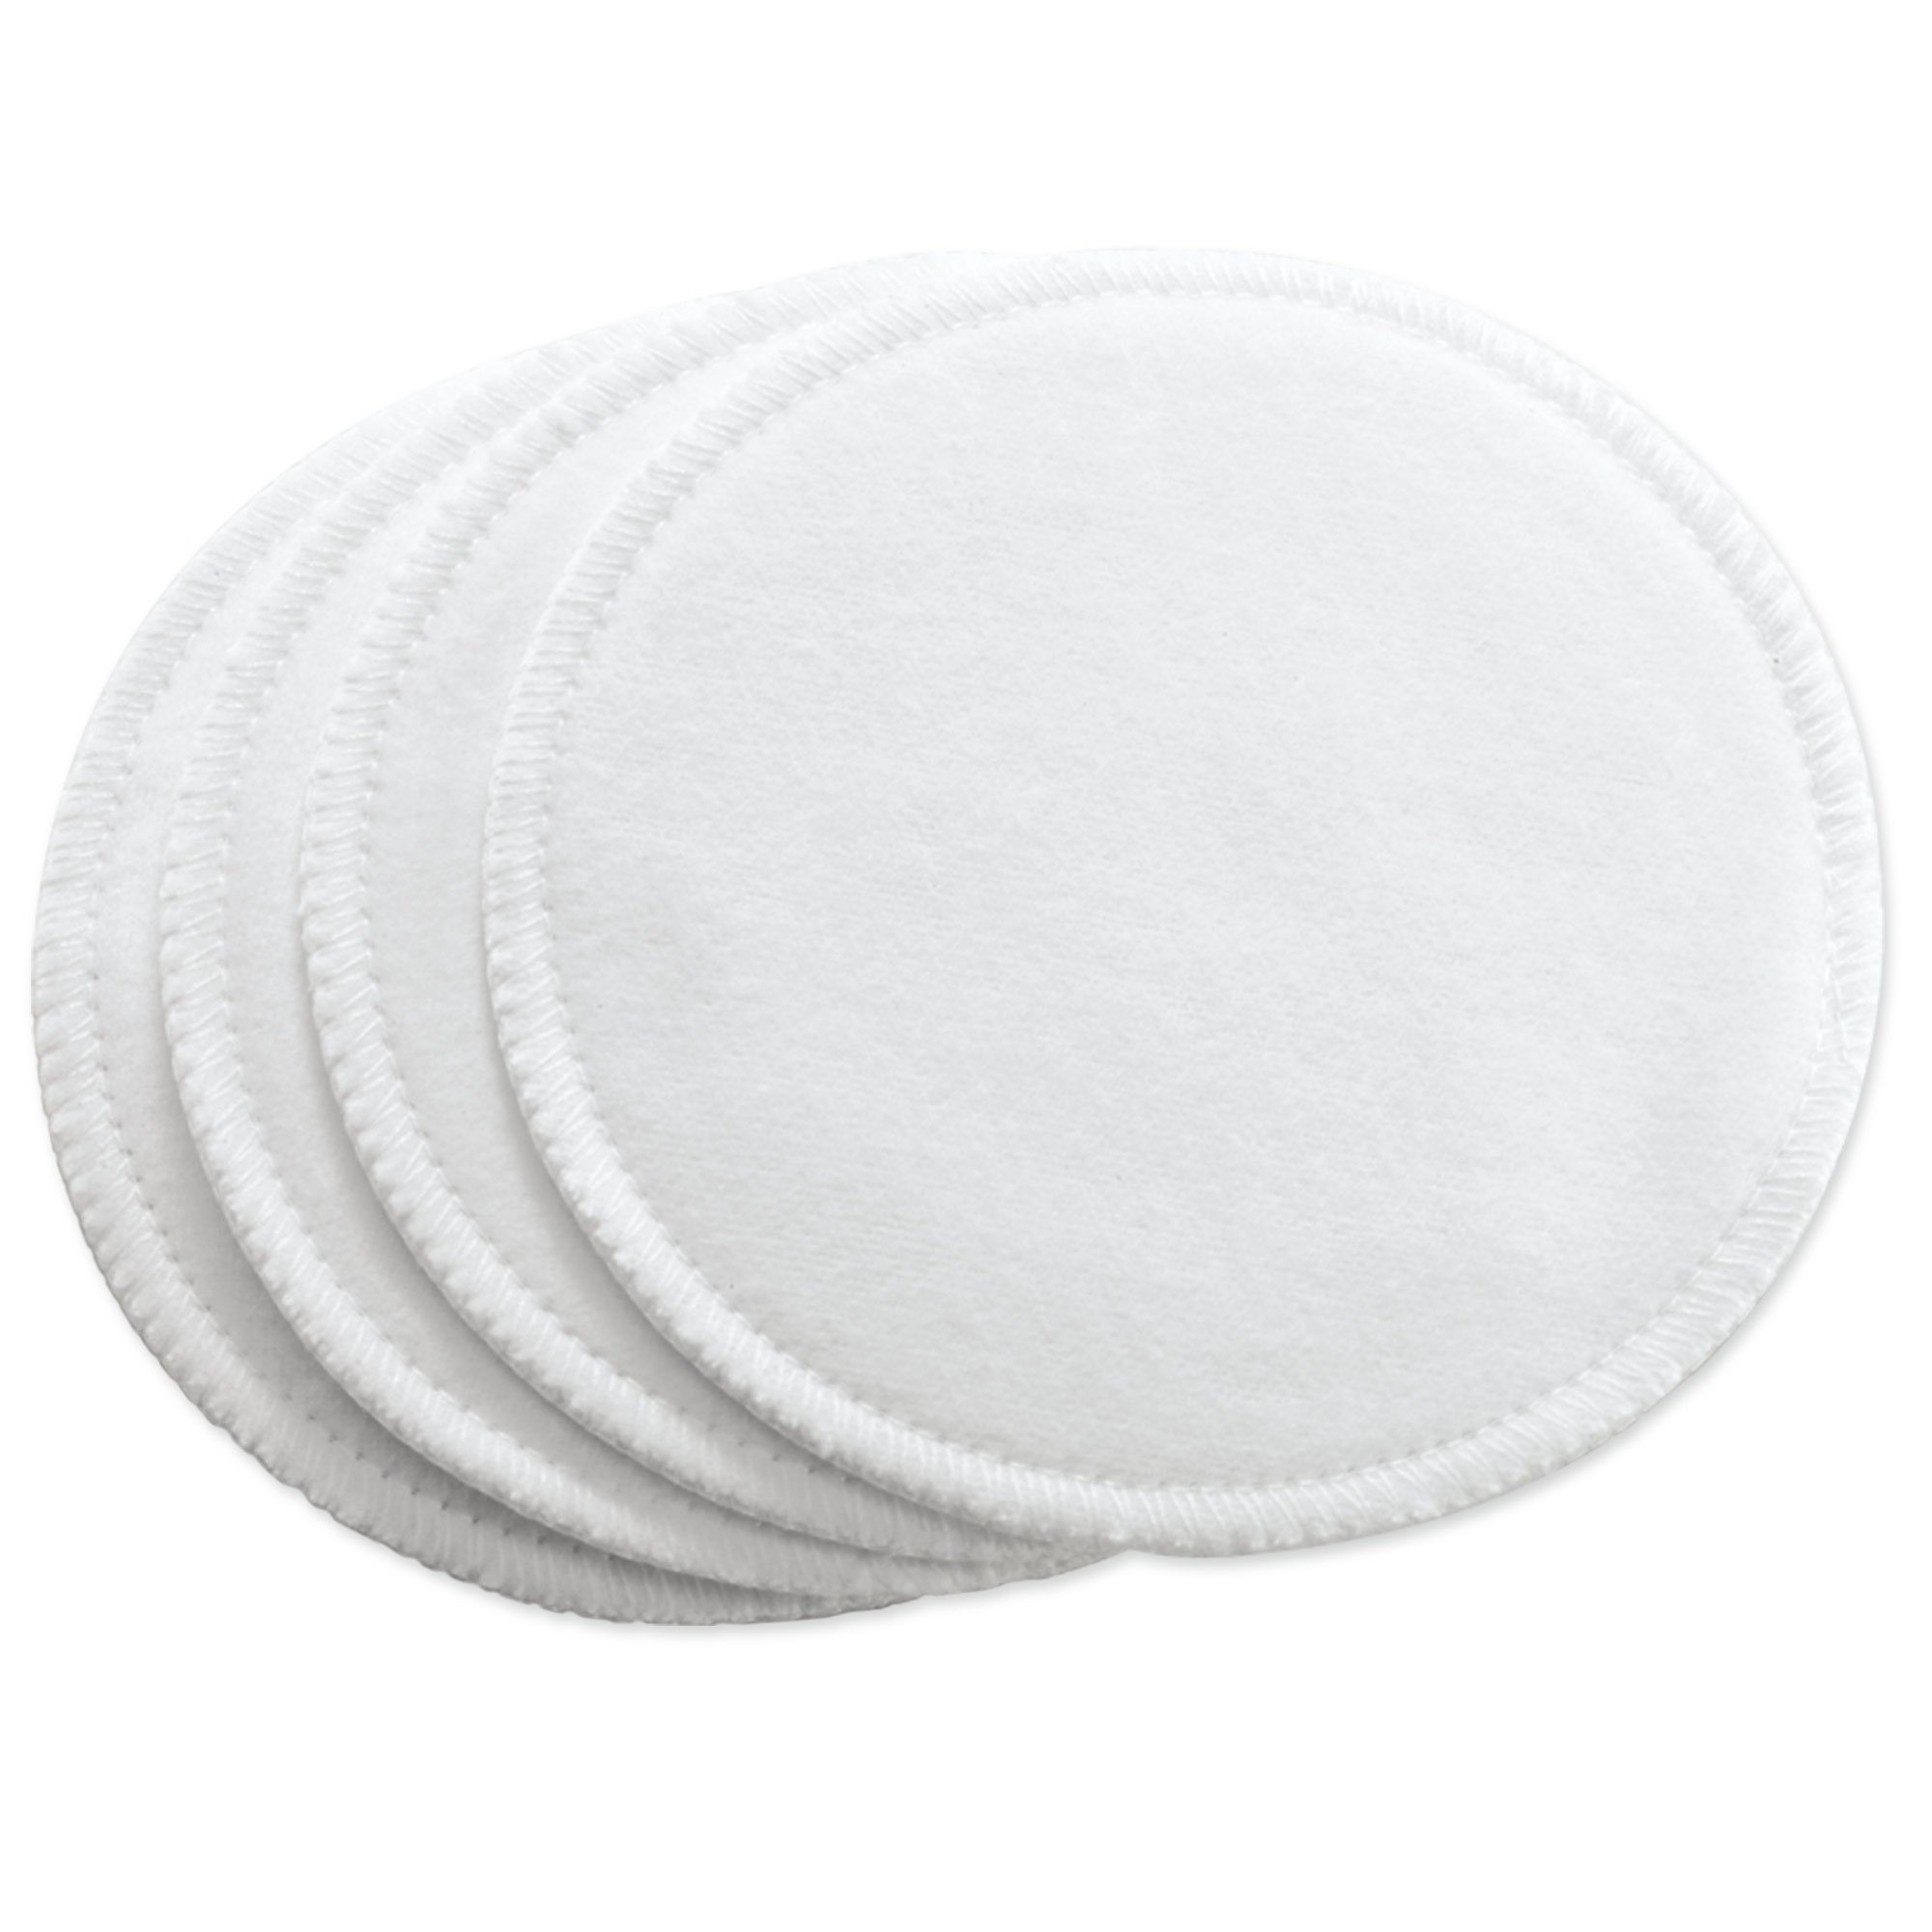 Dr Browns Washasble Bra Pad (4-pack) Bundle of 2